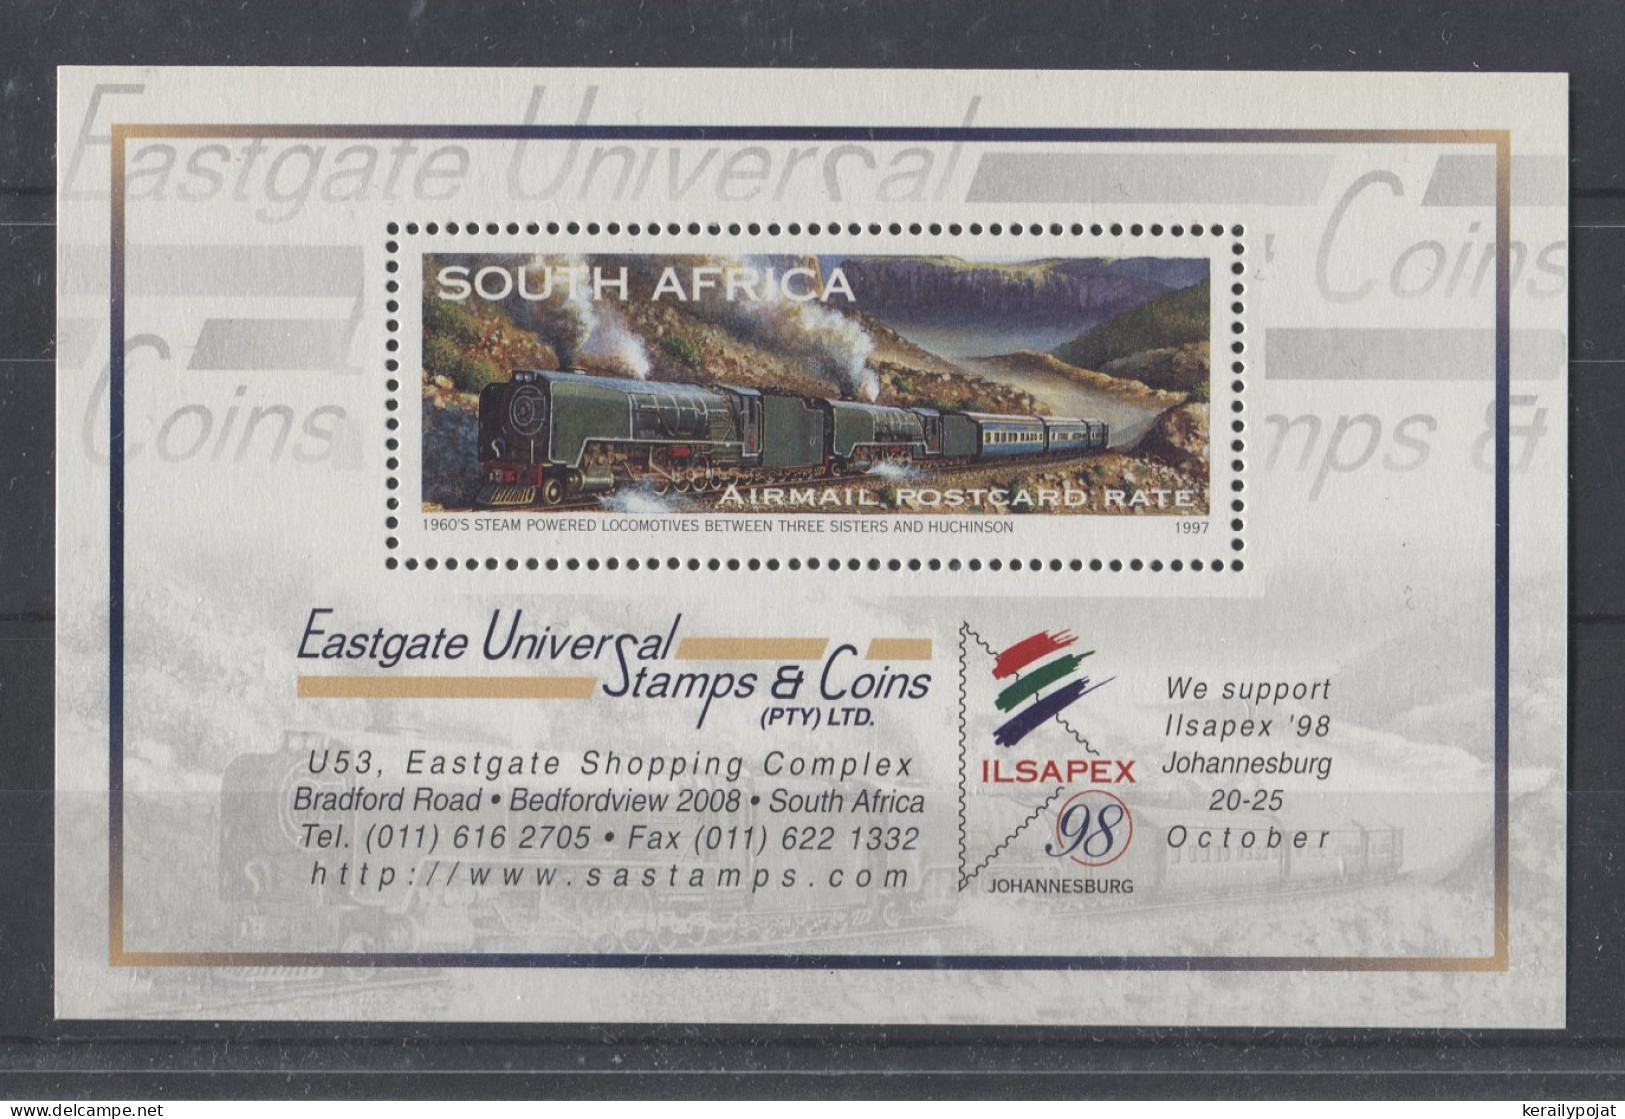 South Africa - 1997 Eastgate Universal Stamps & Coins Block MNH__(TH-11618) - Hojas Bloque